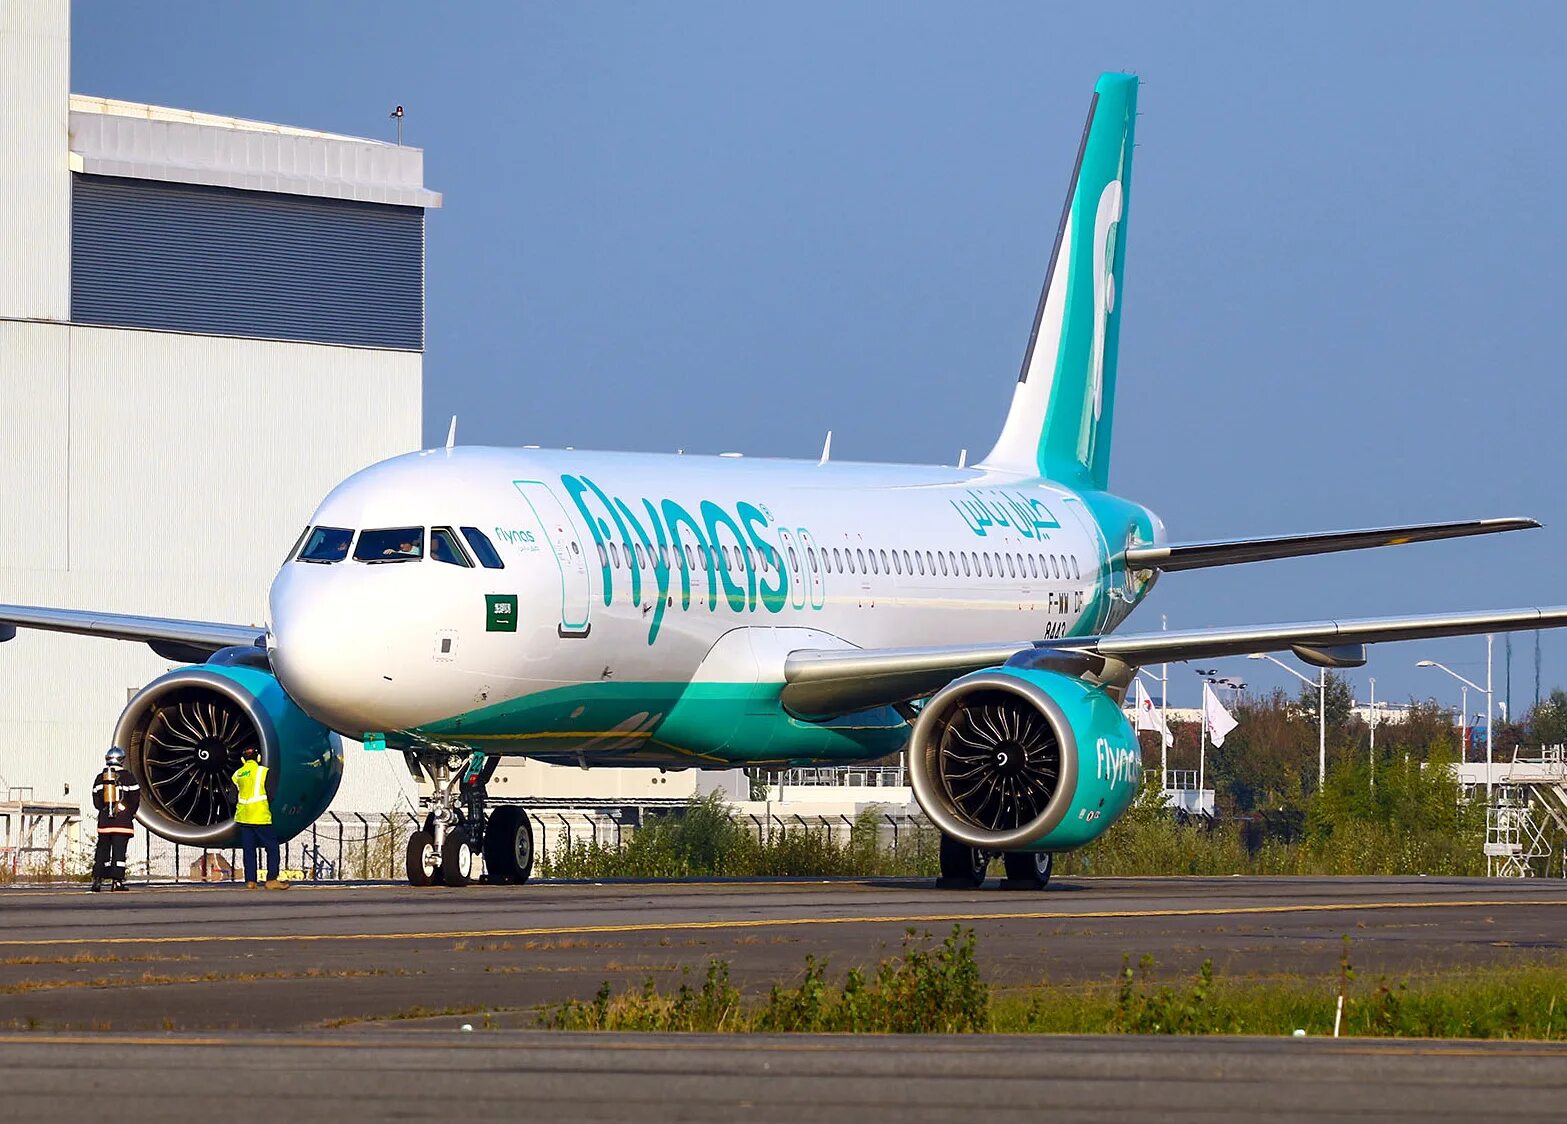 Airbus a320. А320 Нео. Airbus a320neo борт. Airbus 320 Нео. A320neo flynas.